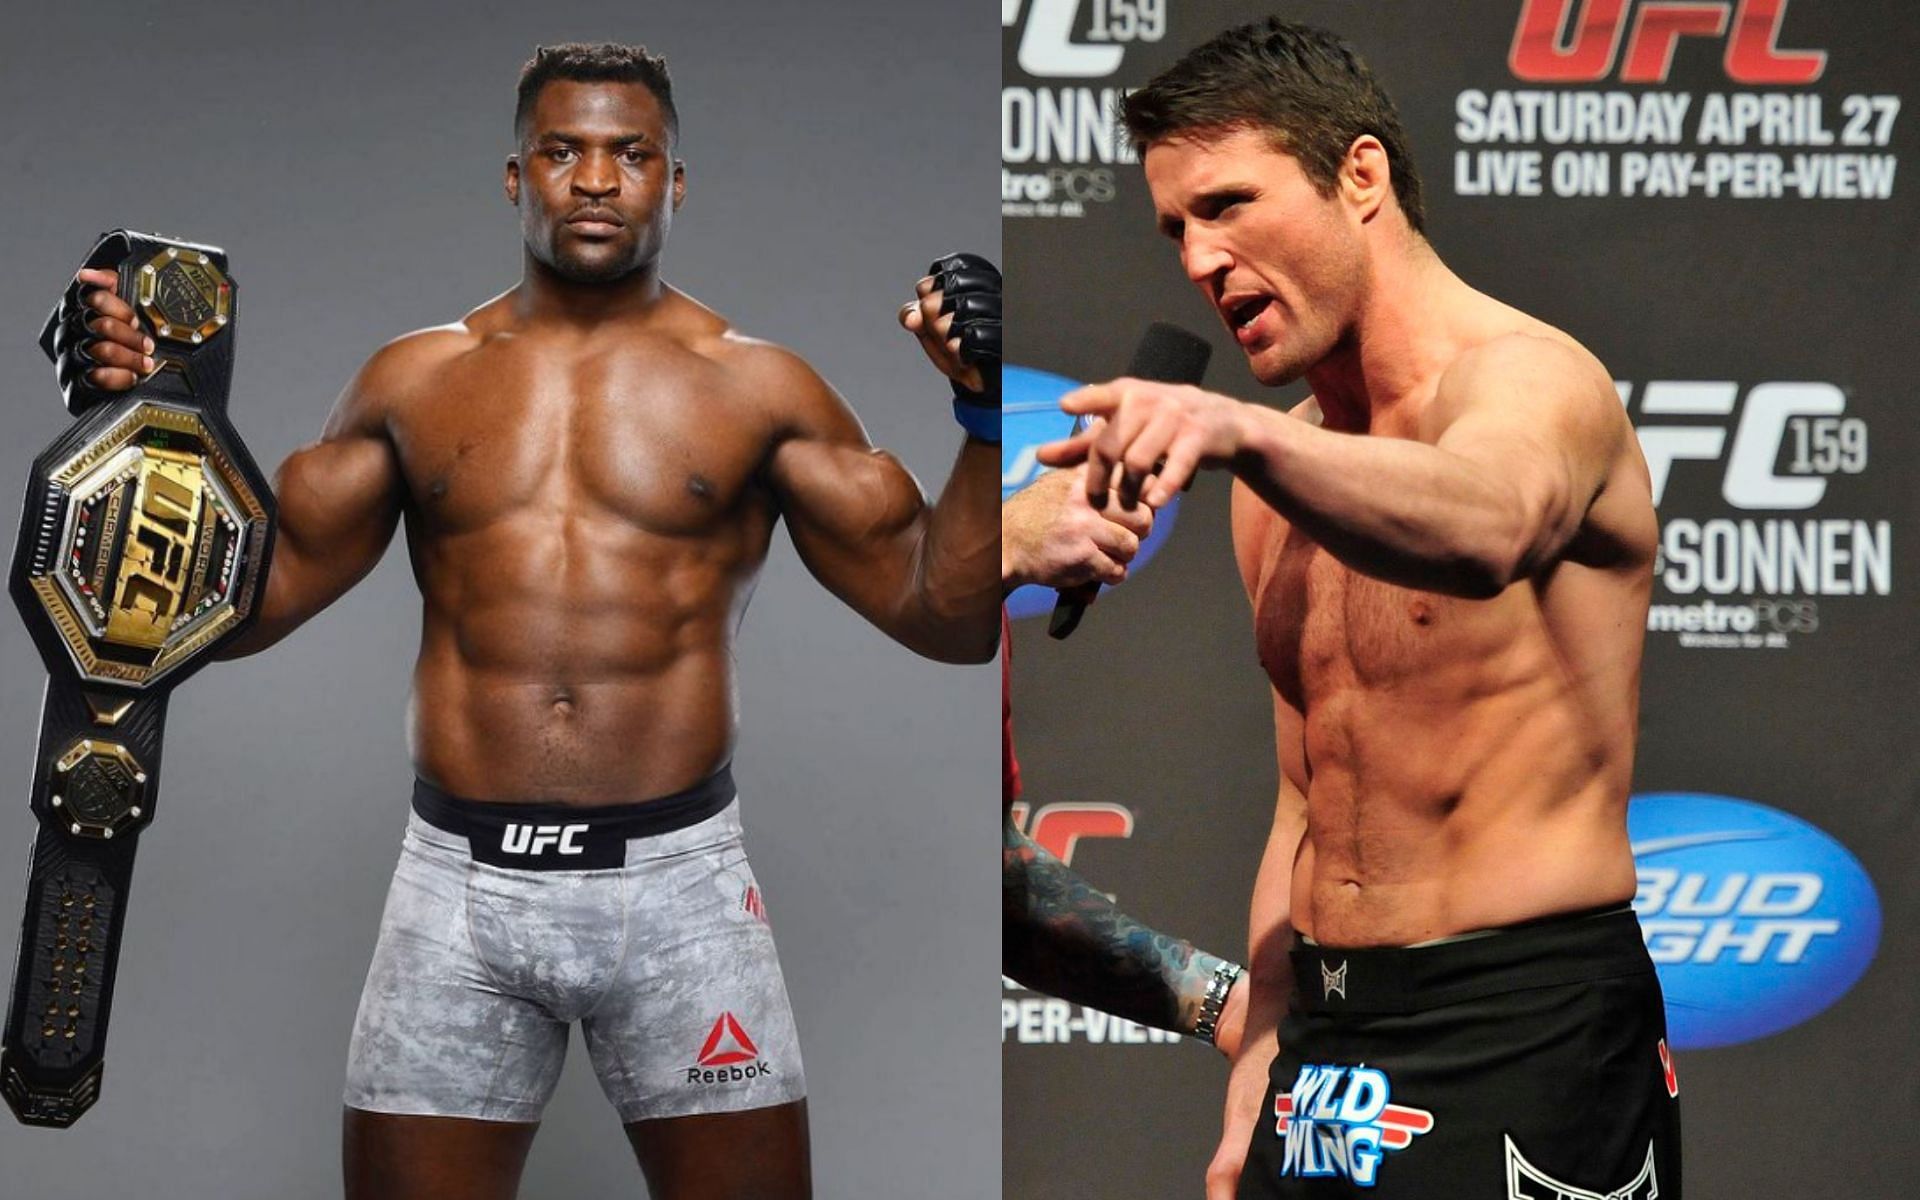 Francis Ngannou (L) and Chael Sonnen (R) [Images Courtesy: Getty]